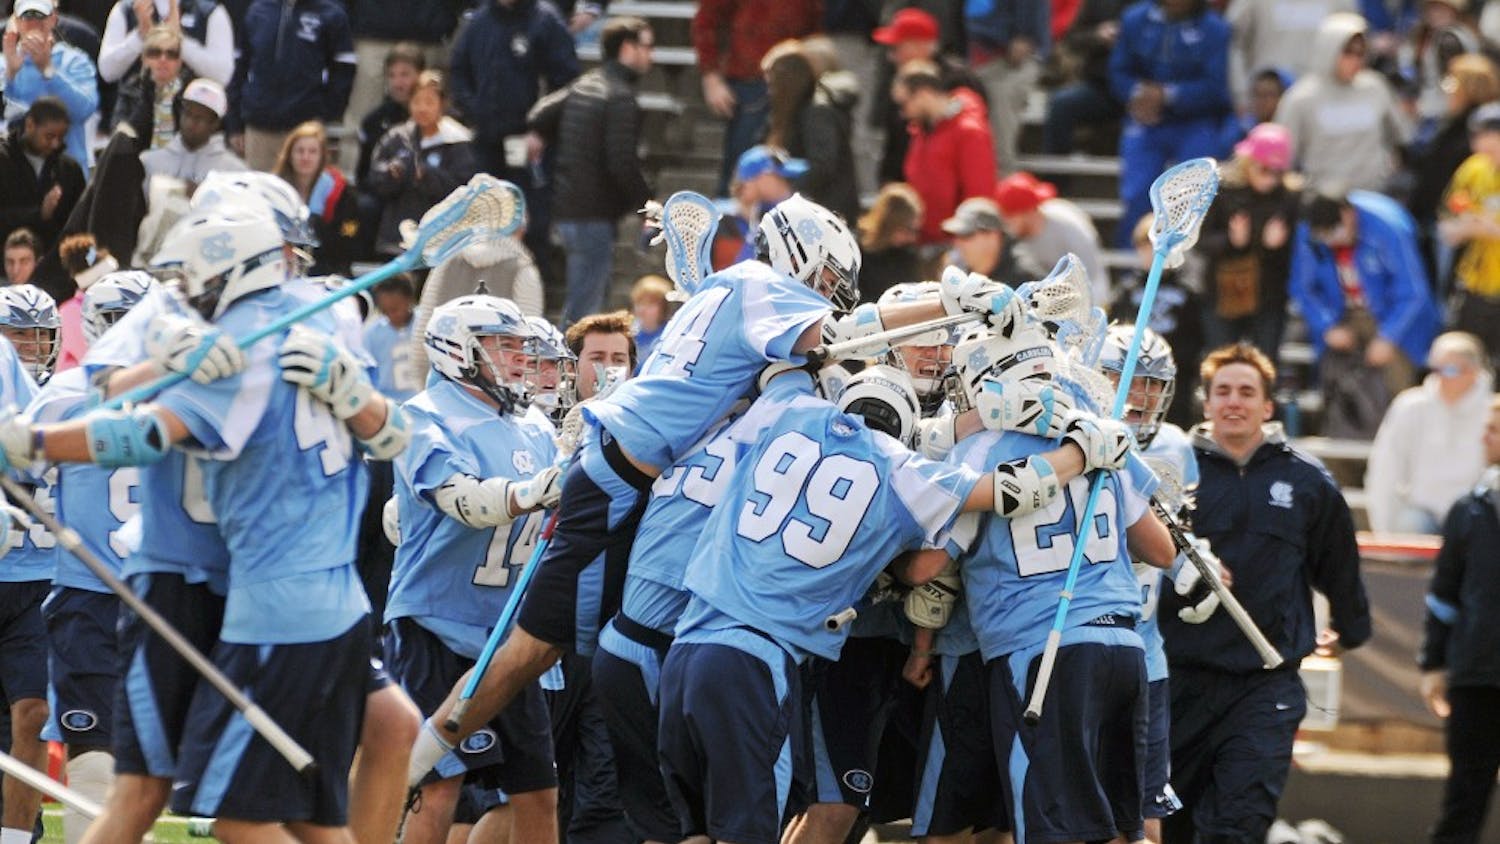 The Tar Heels celebrate after defeating the undefeated Terps.